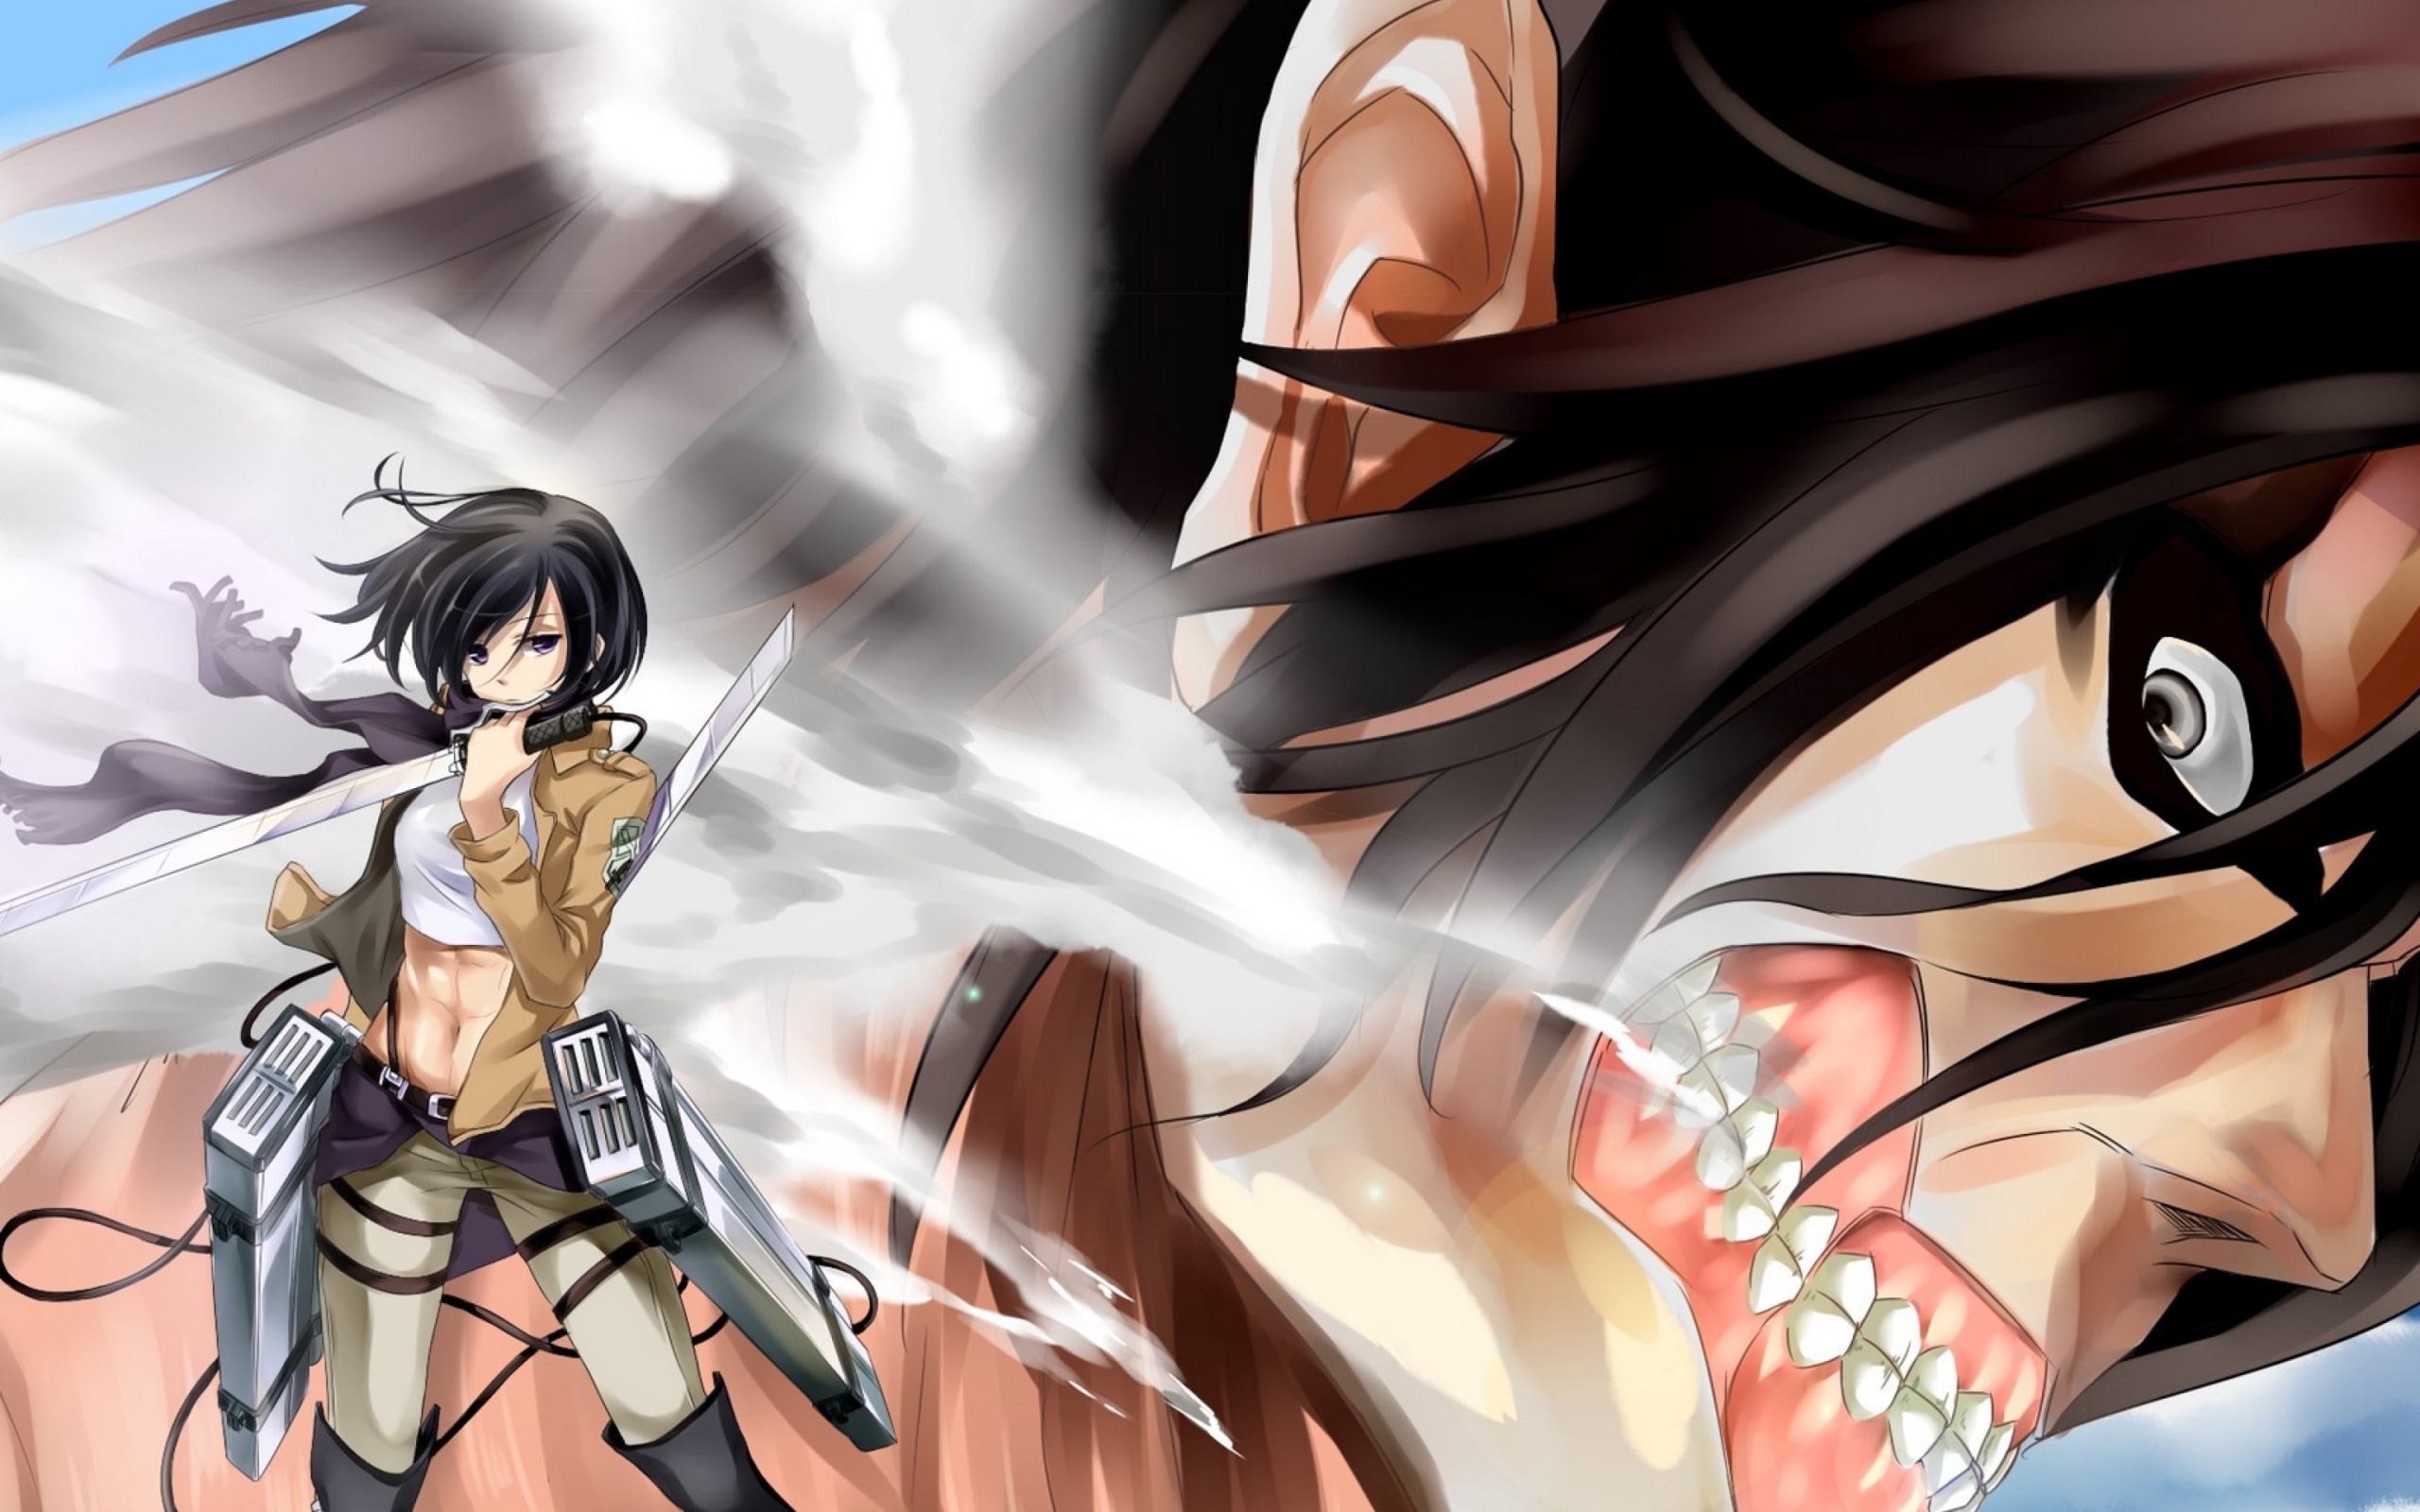 Attack on Titan with Eren and Mikasa screenshot #1 2560x1600